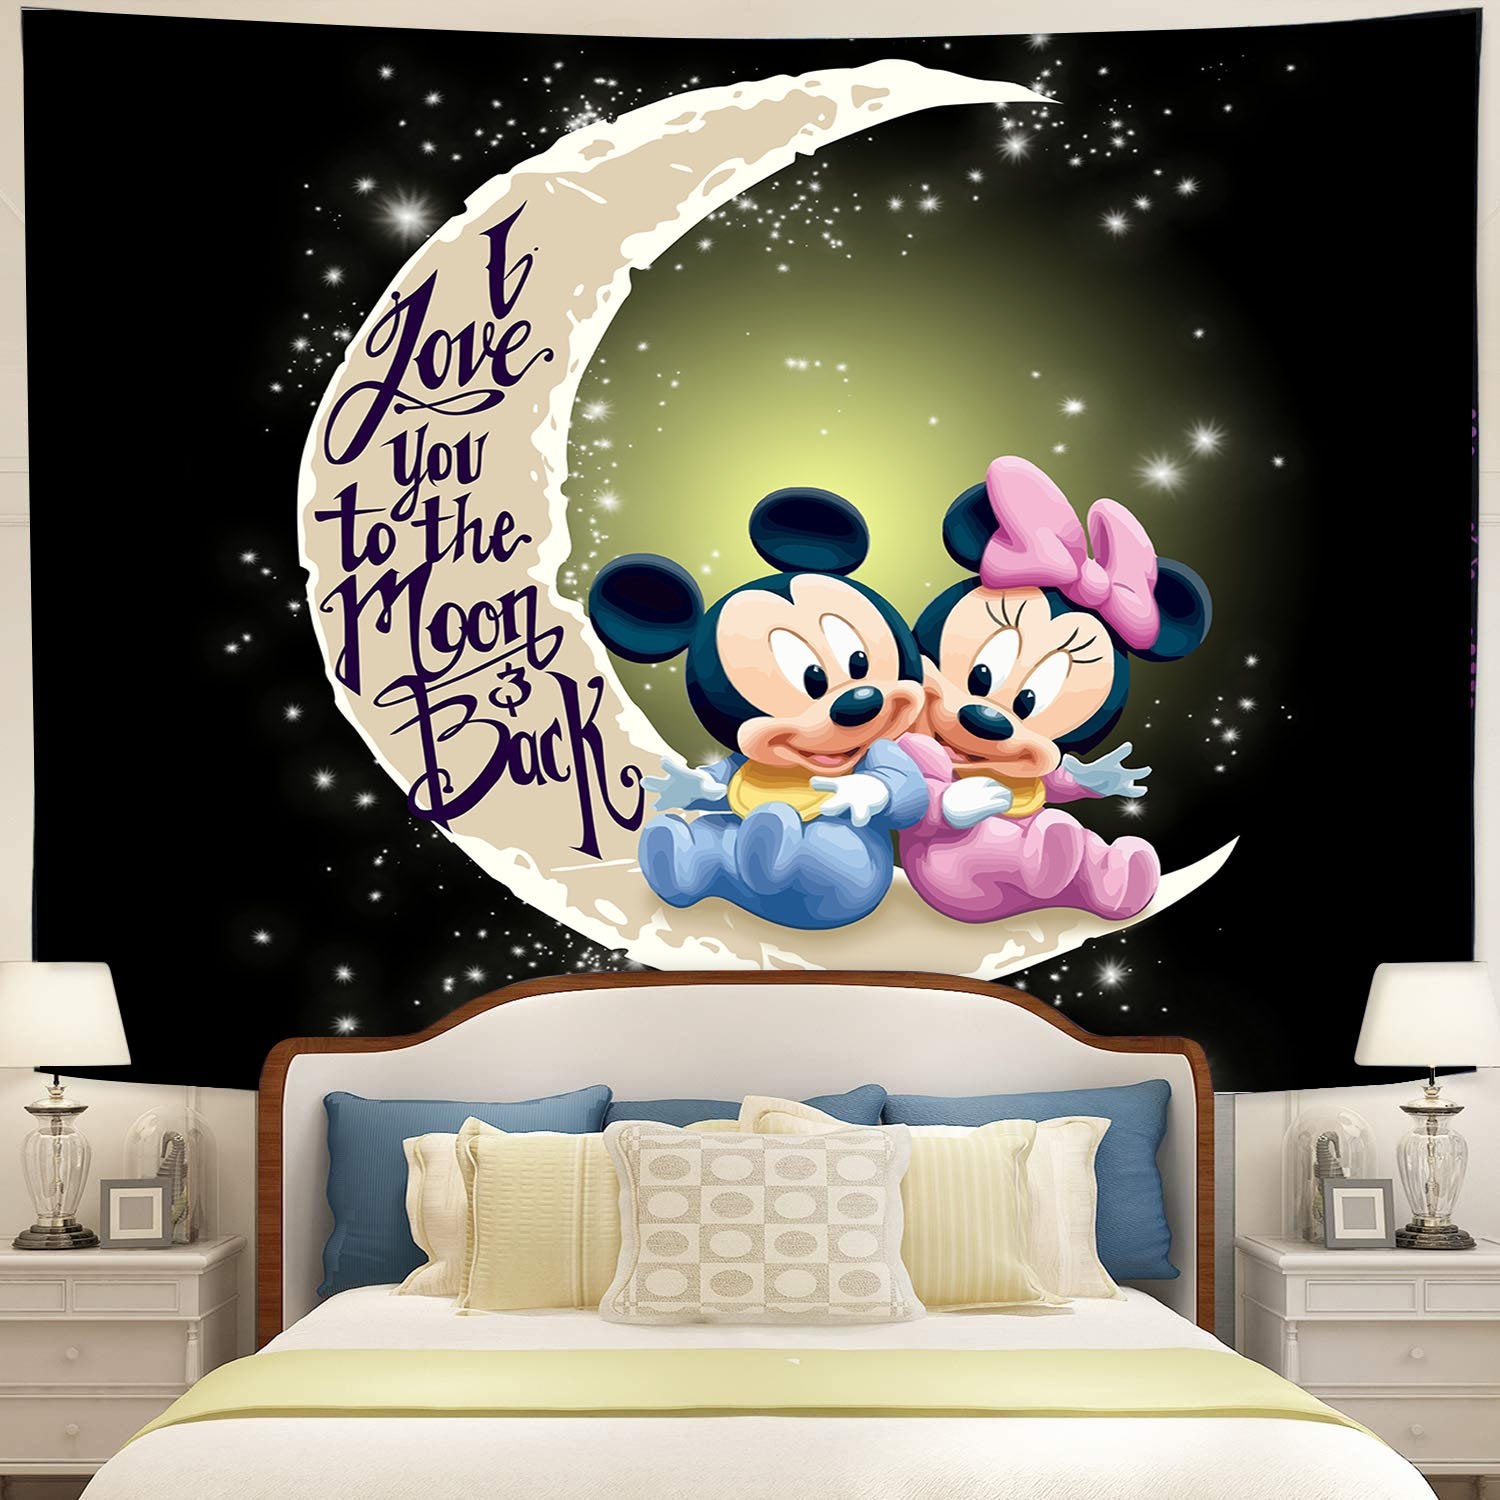 Mice Couple Love You To The Moon Tapestry Room Decor